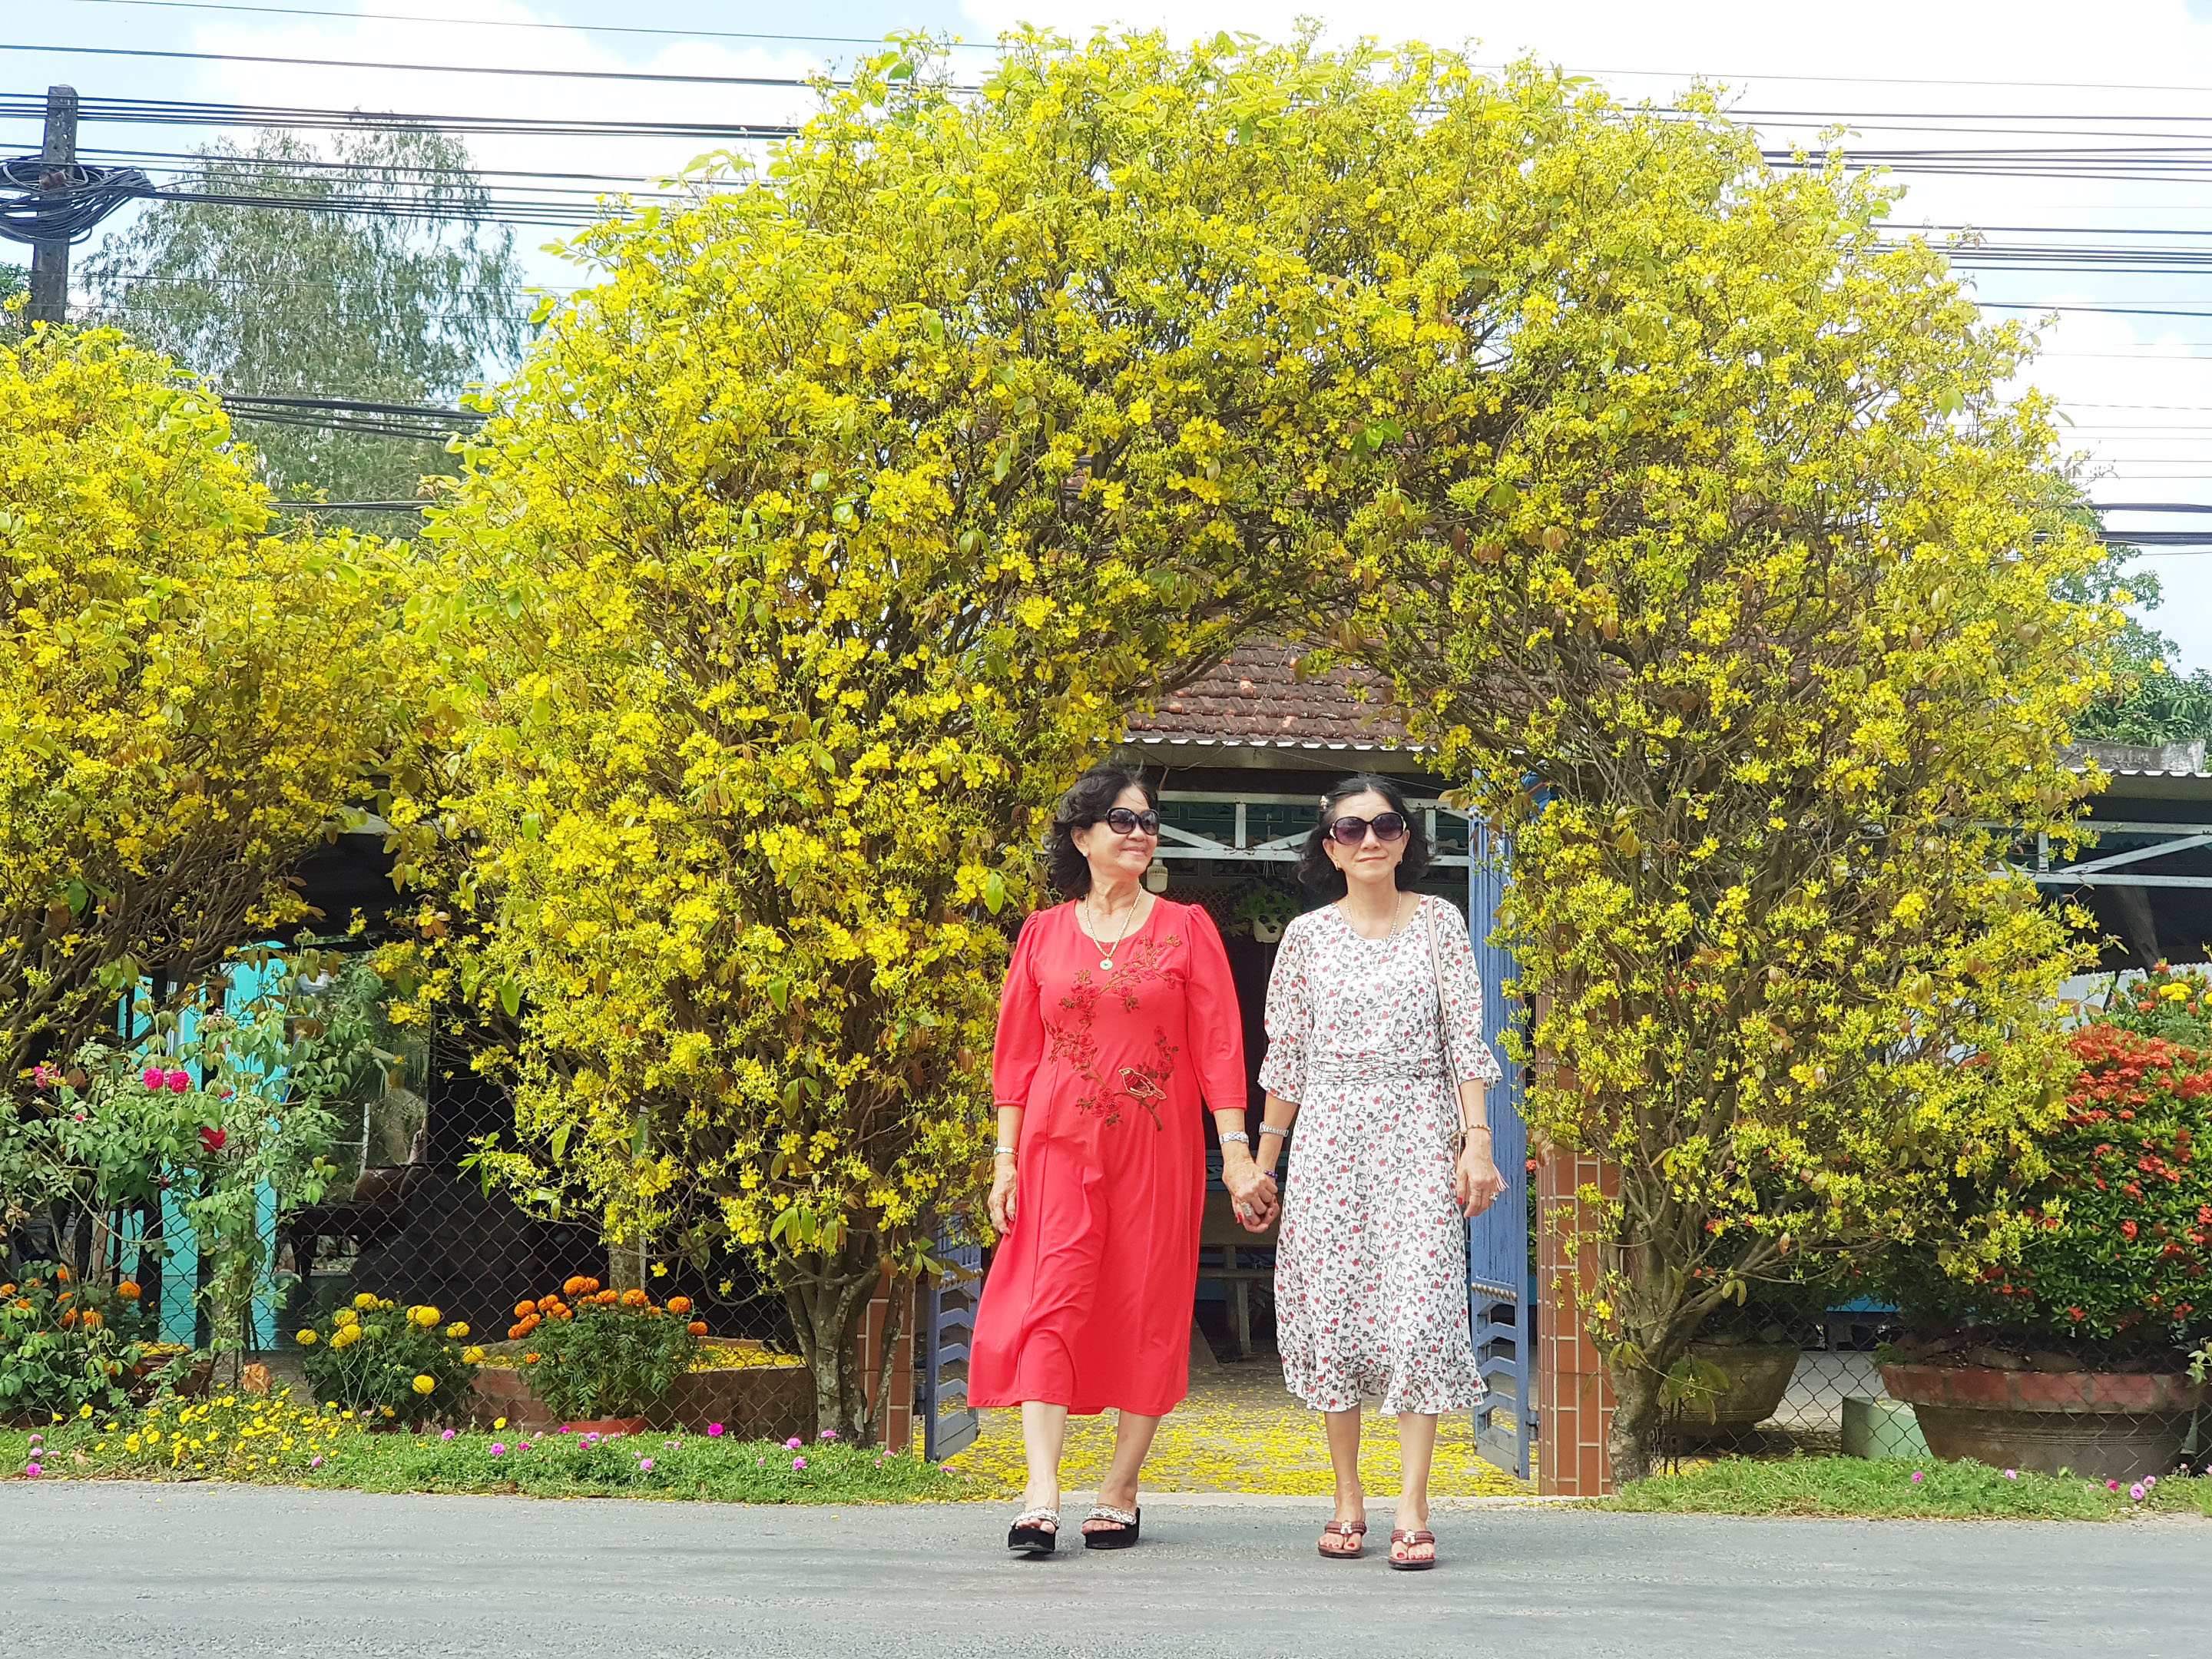 Le Thi Mang (left) and her younger sister Le Thi le pose for a photo in front of Vo Van Banh’s house gate grown from two yellow apricot blossom trees in the Mekong Delta province of An Giang’s Thoai Son District on February 3, 2022. Photo: Ngoc Khai / Tuoi Tre